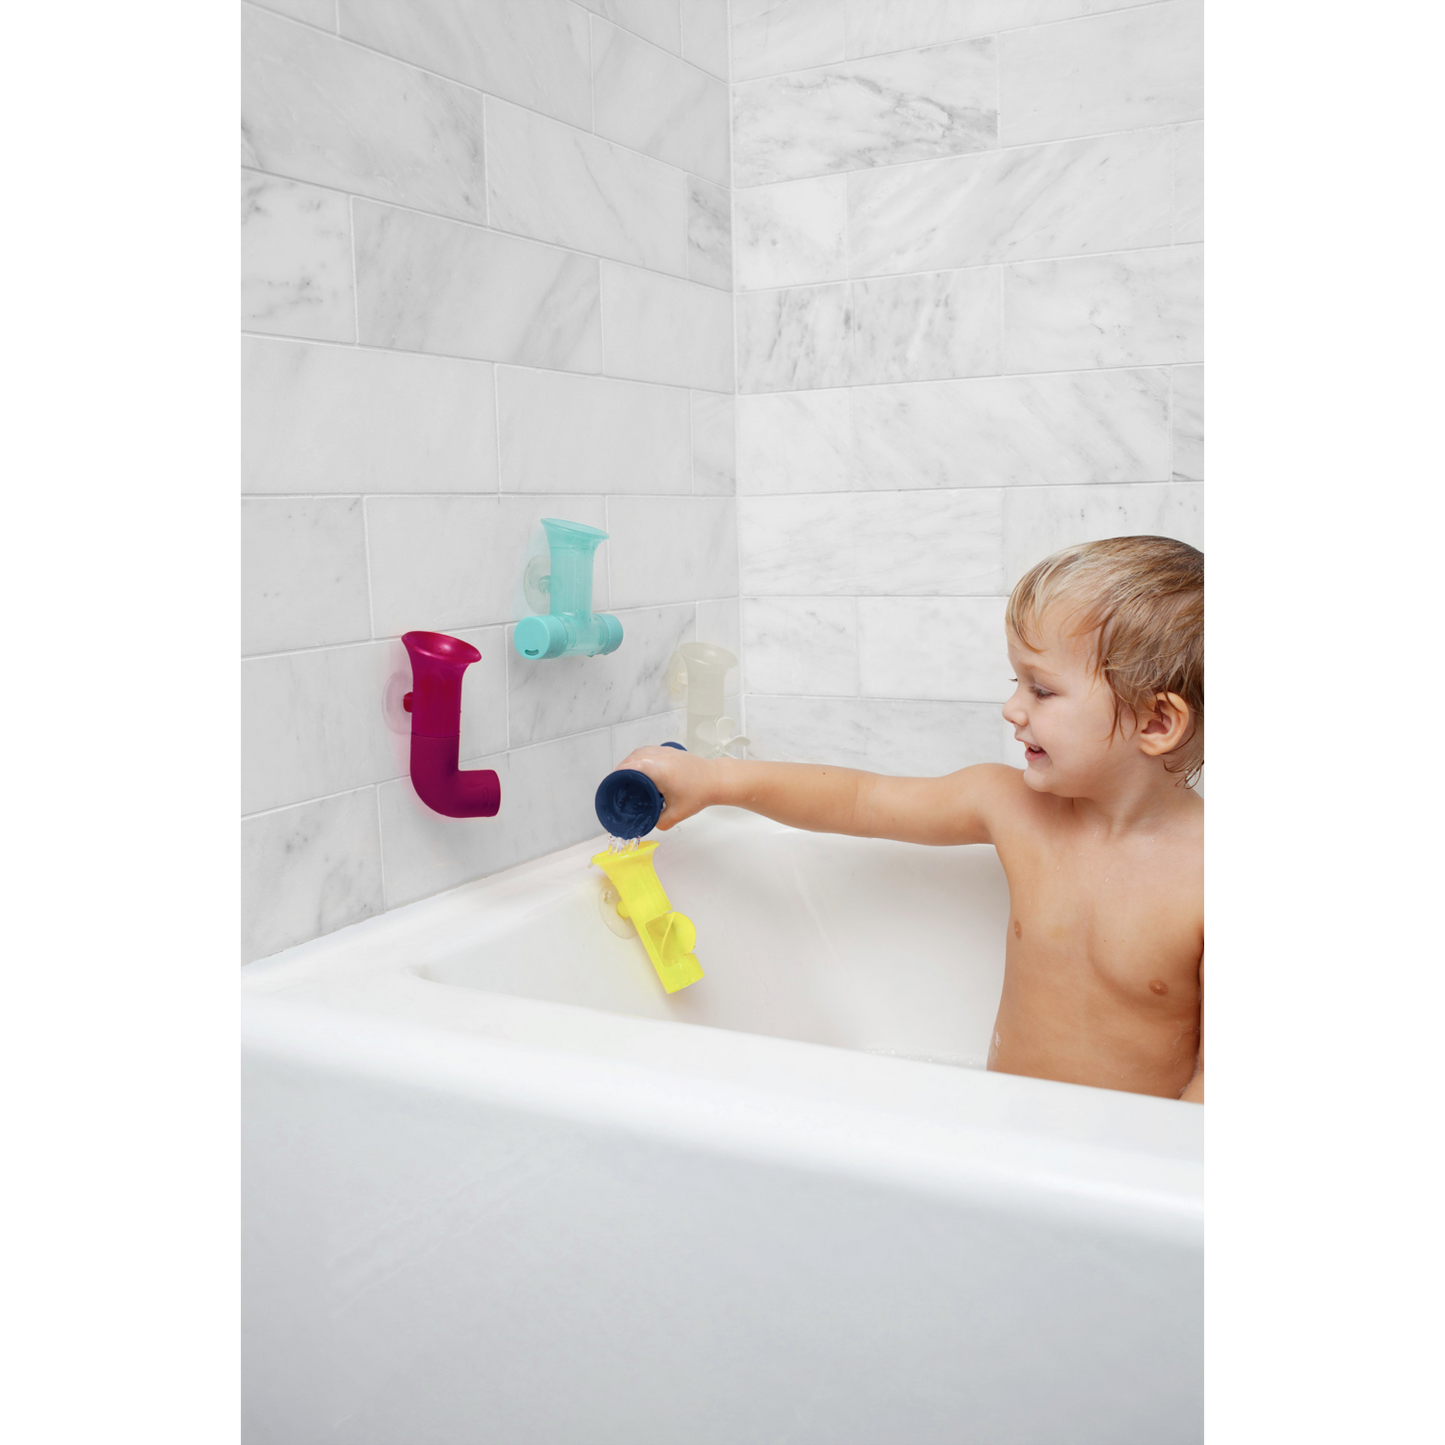 PIPES Building Bath Toy